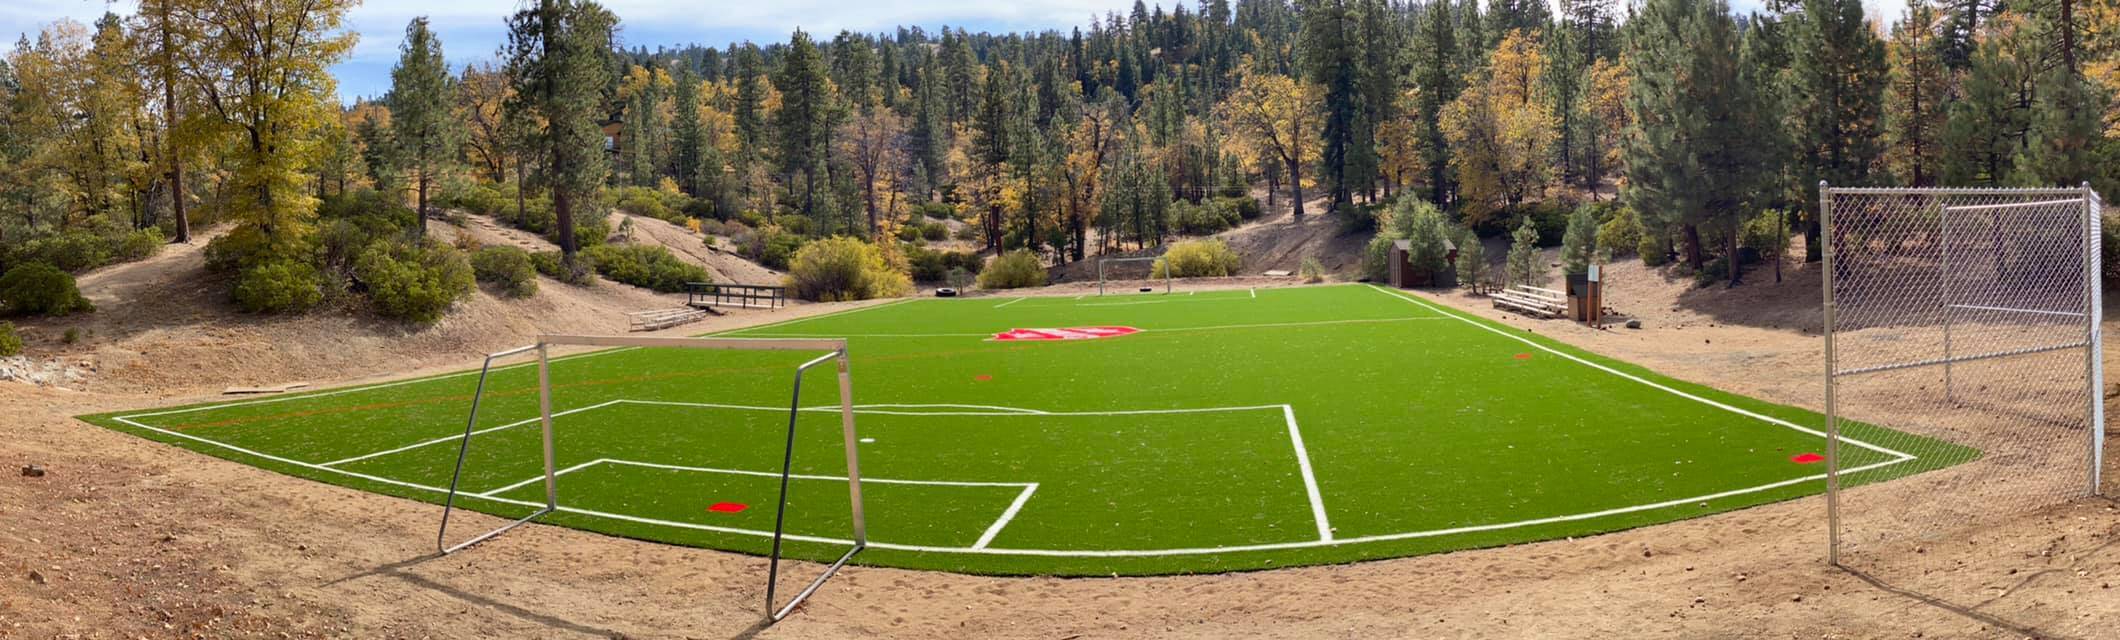 Sports Field Artificial Grass for schools, parks, Athletic Fields, San Diego